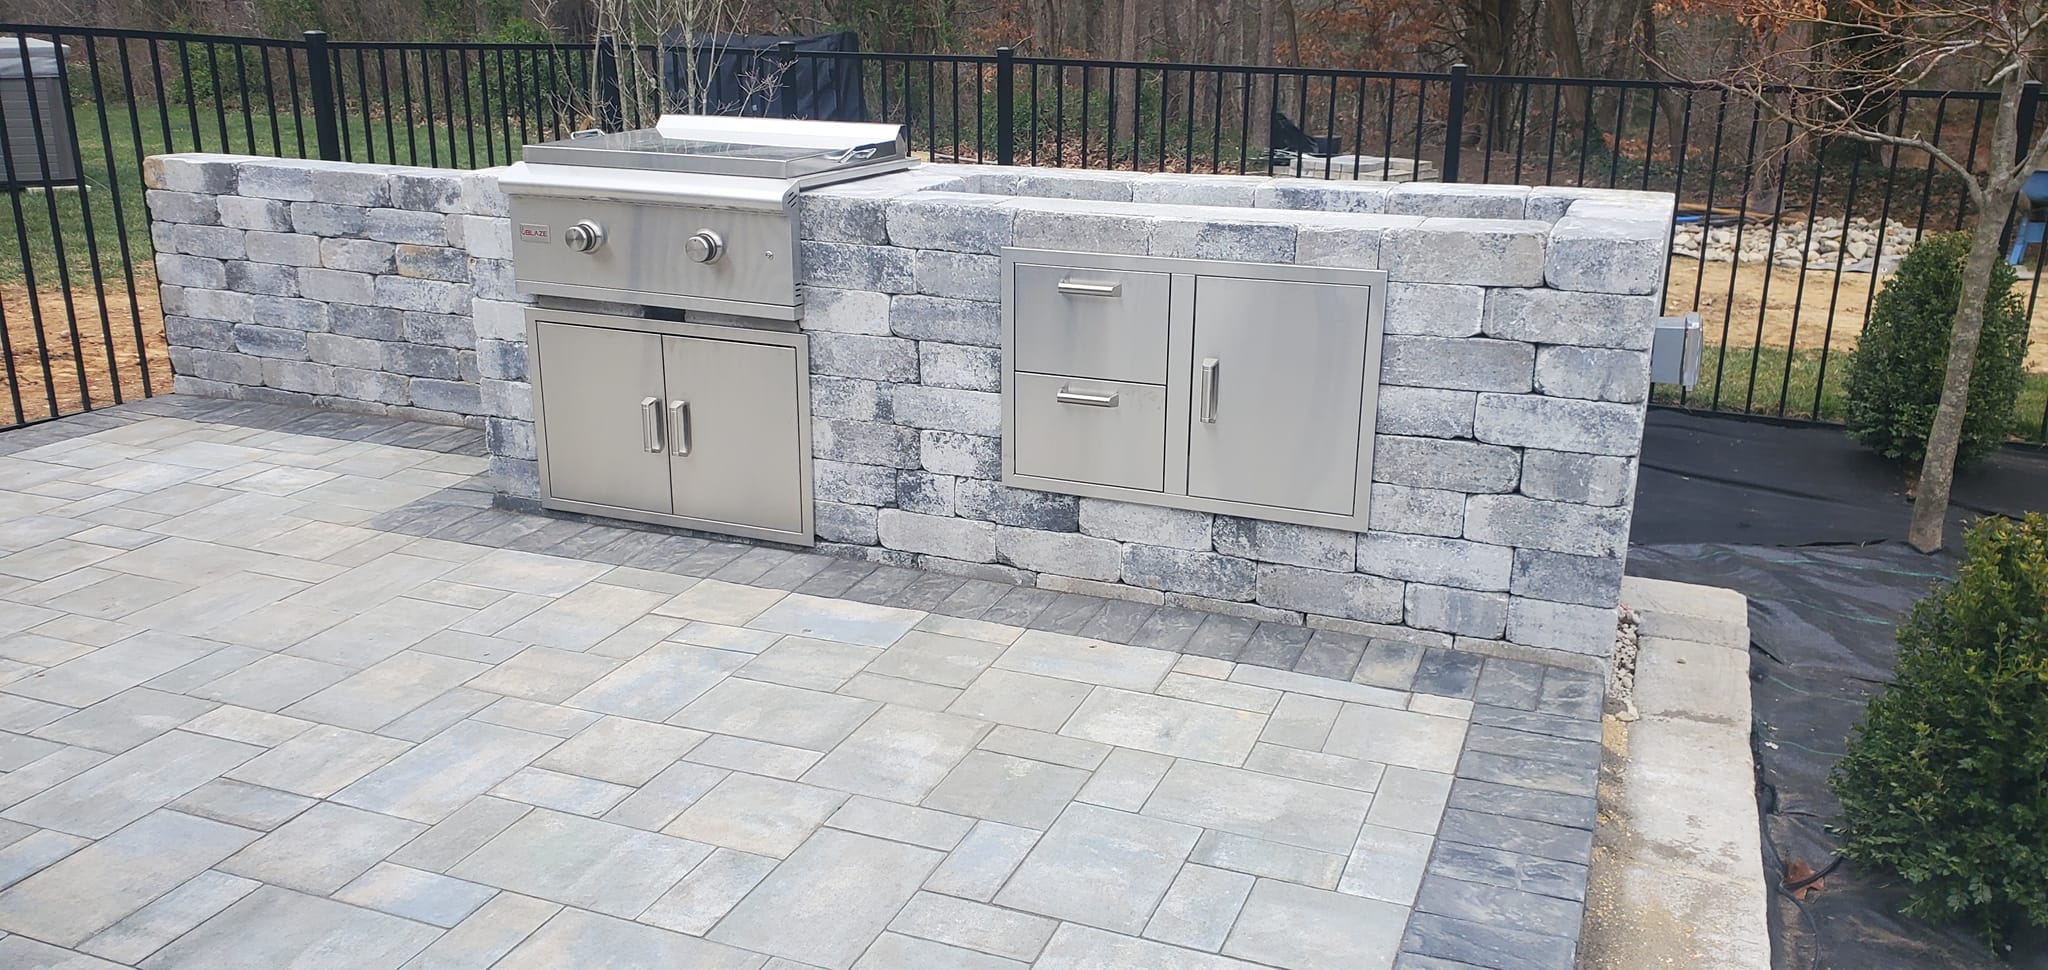 Adam's Lawn & Landscaping White Plains Maryland Paver Patio Kitchen